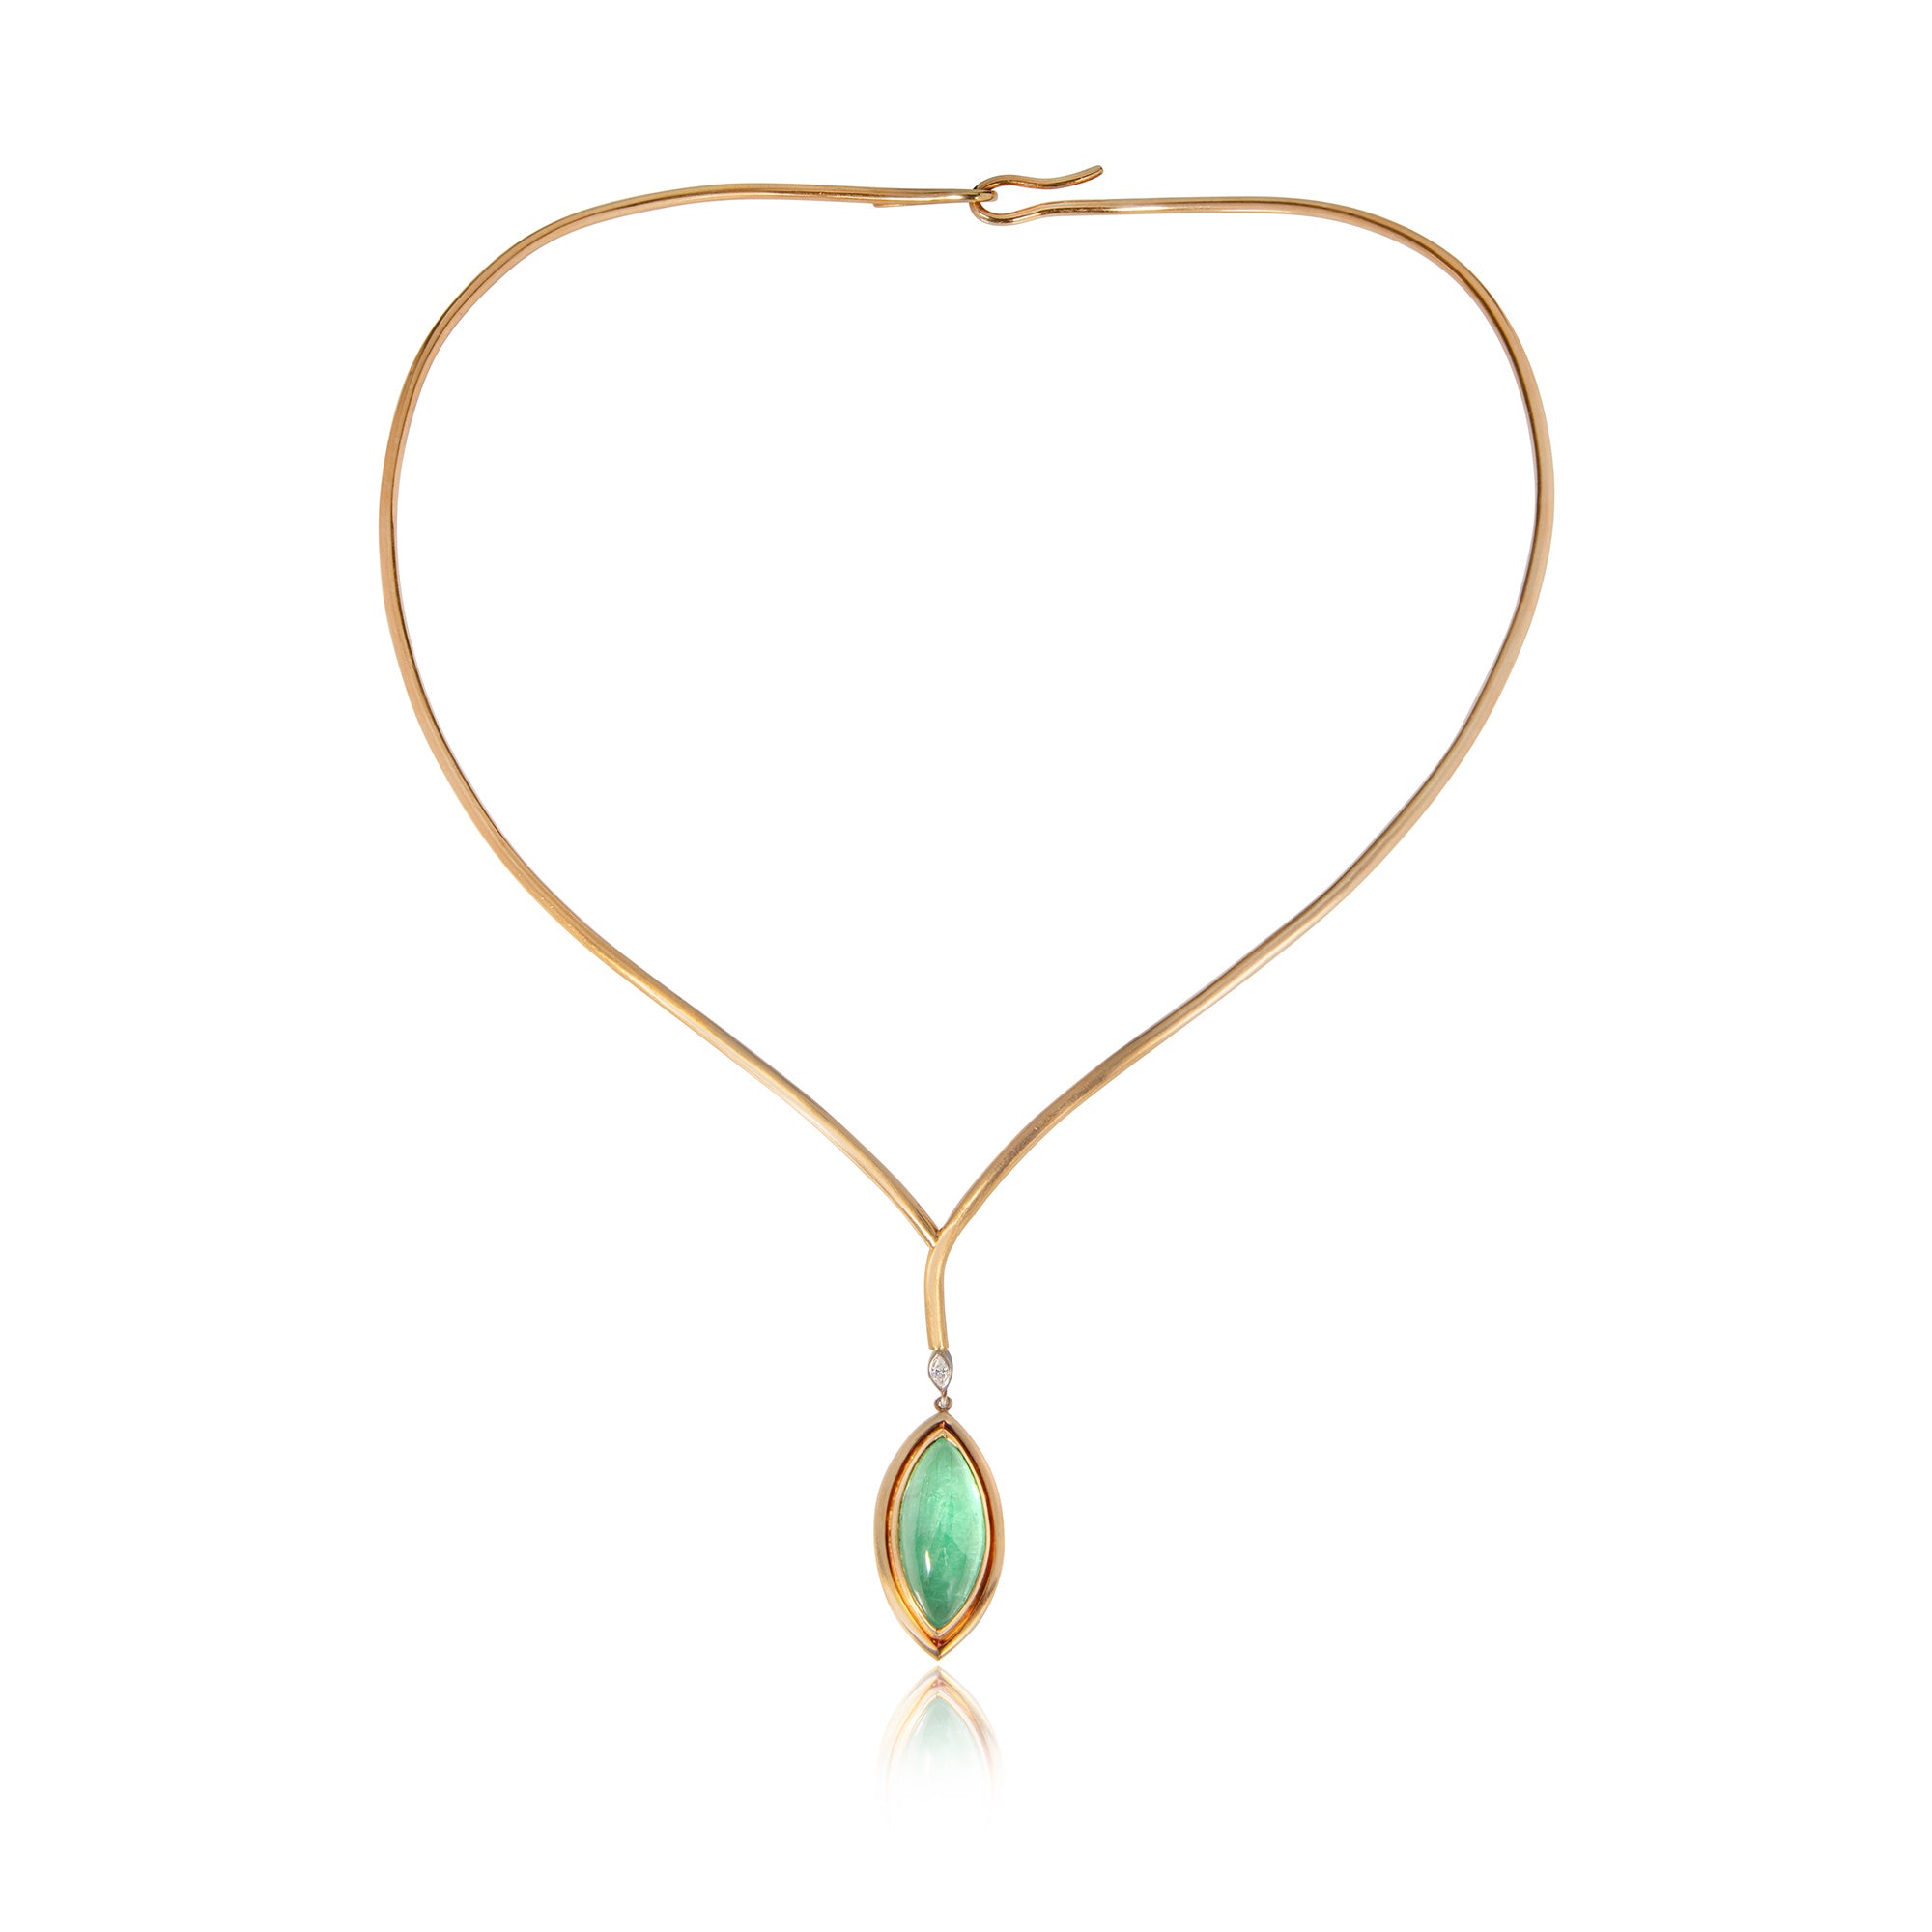 Navette shaped Paraiba tourmaline cabochon set in yellow gold, hung on tear drop shaped yellow gold torque on white background